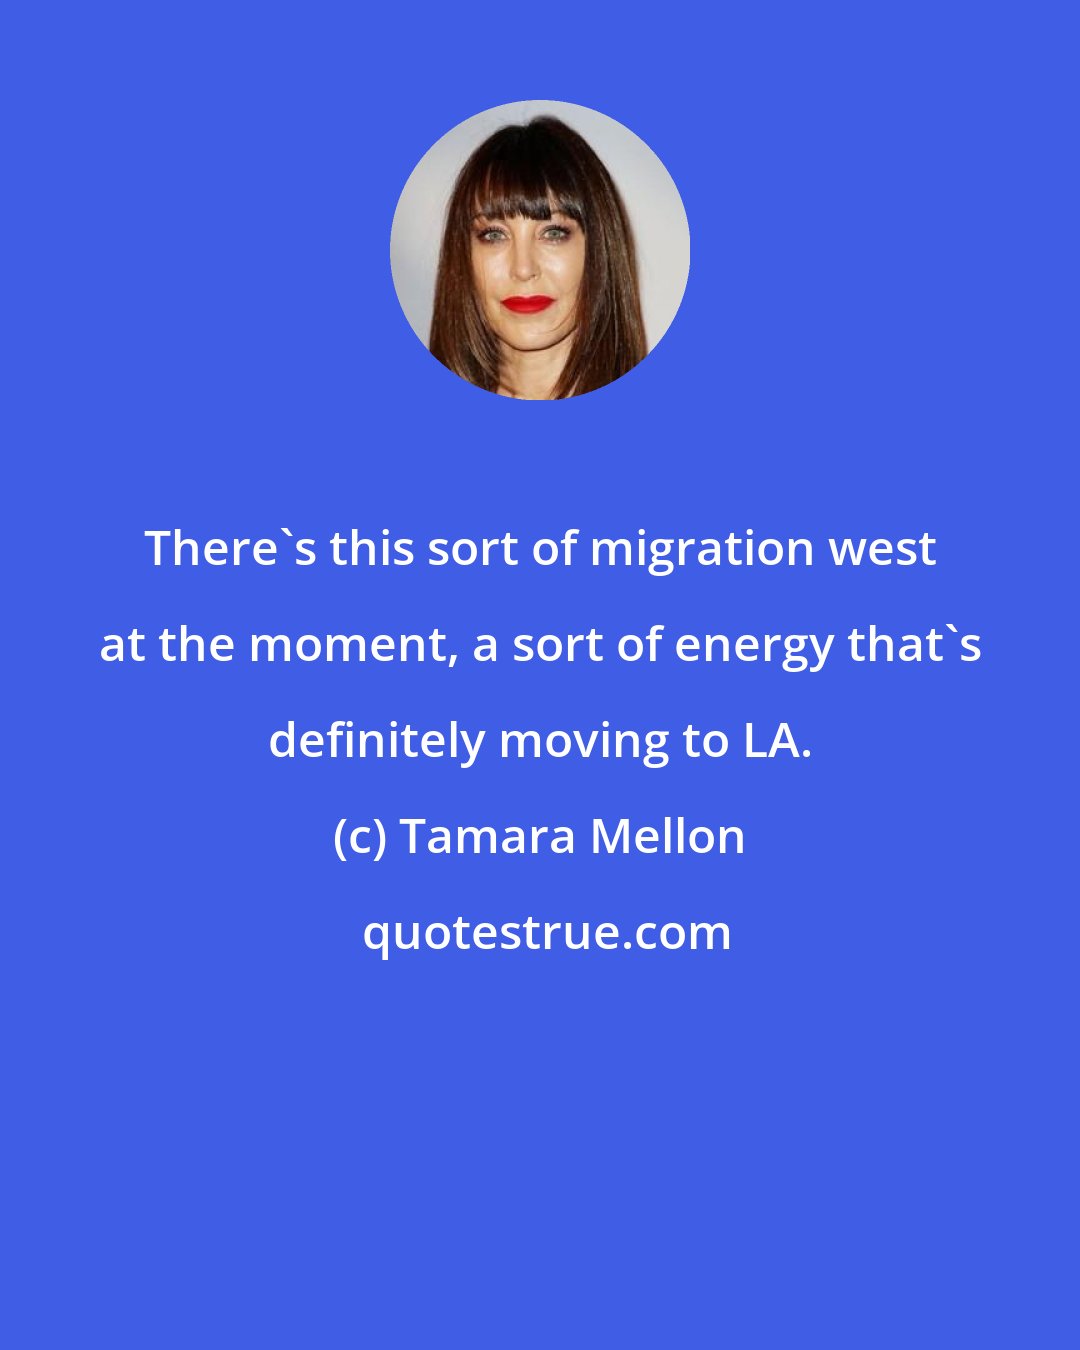 Tamara Mellon: There's this sort of migration west at the moment, a sort of energy that's definitely moving to LA.